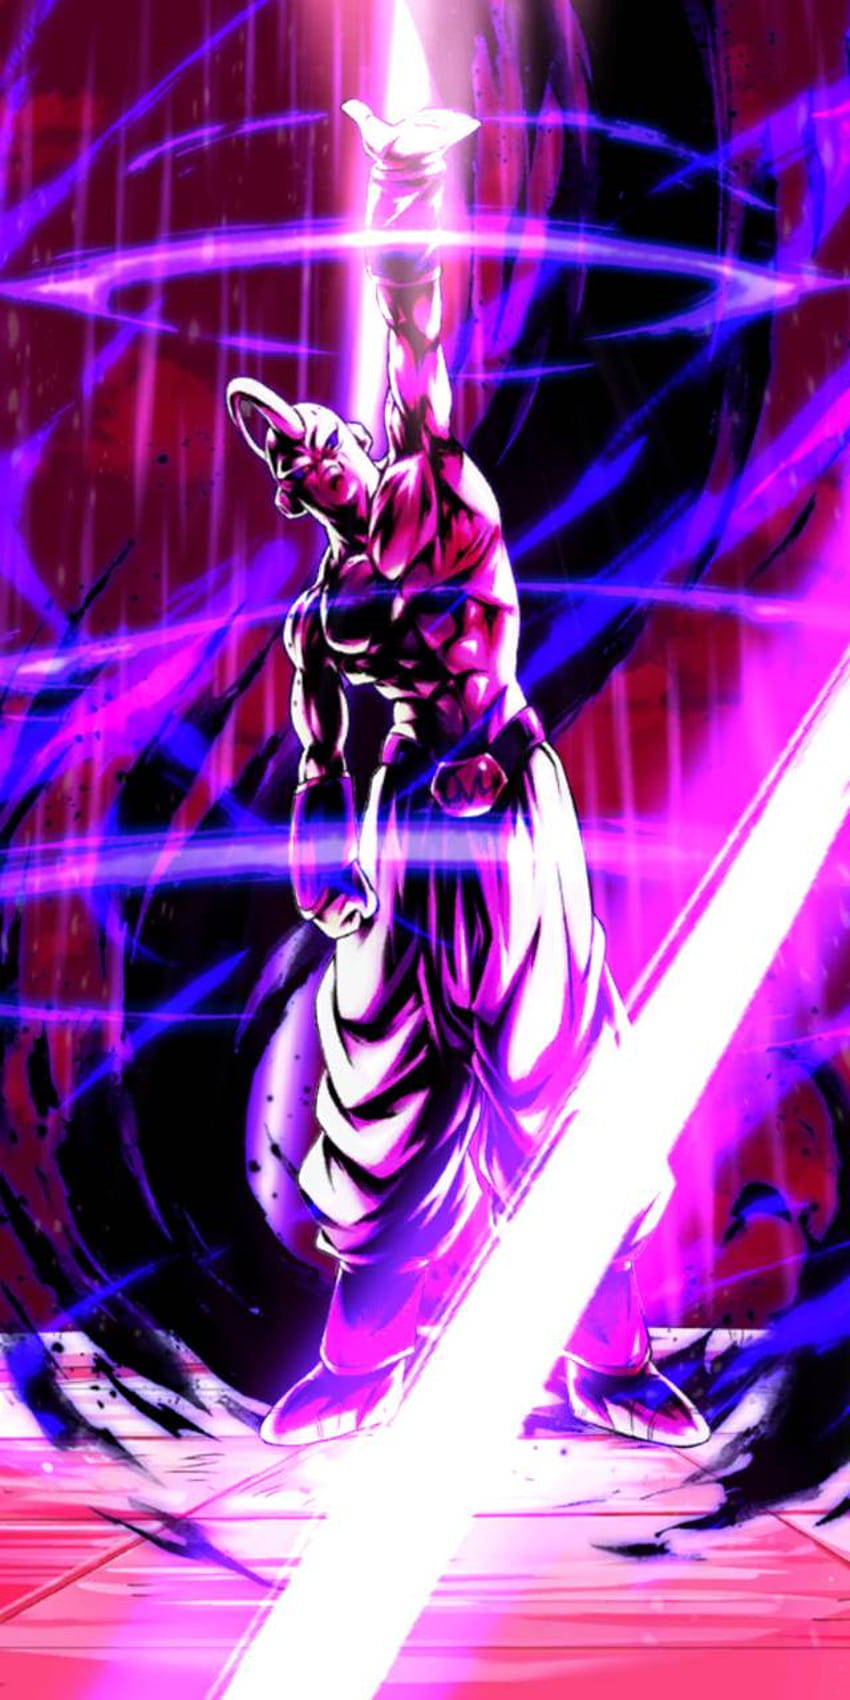 Buu Wallpaper 60 pictures